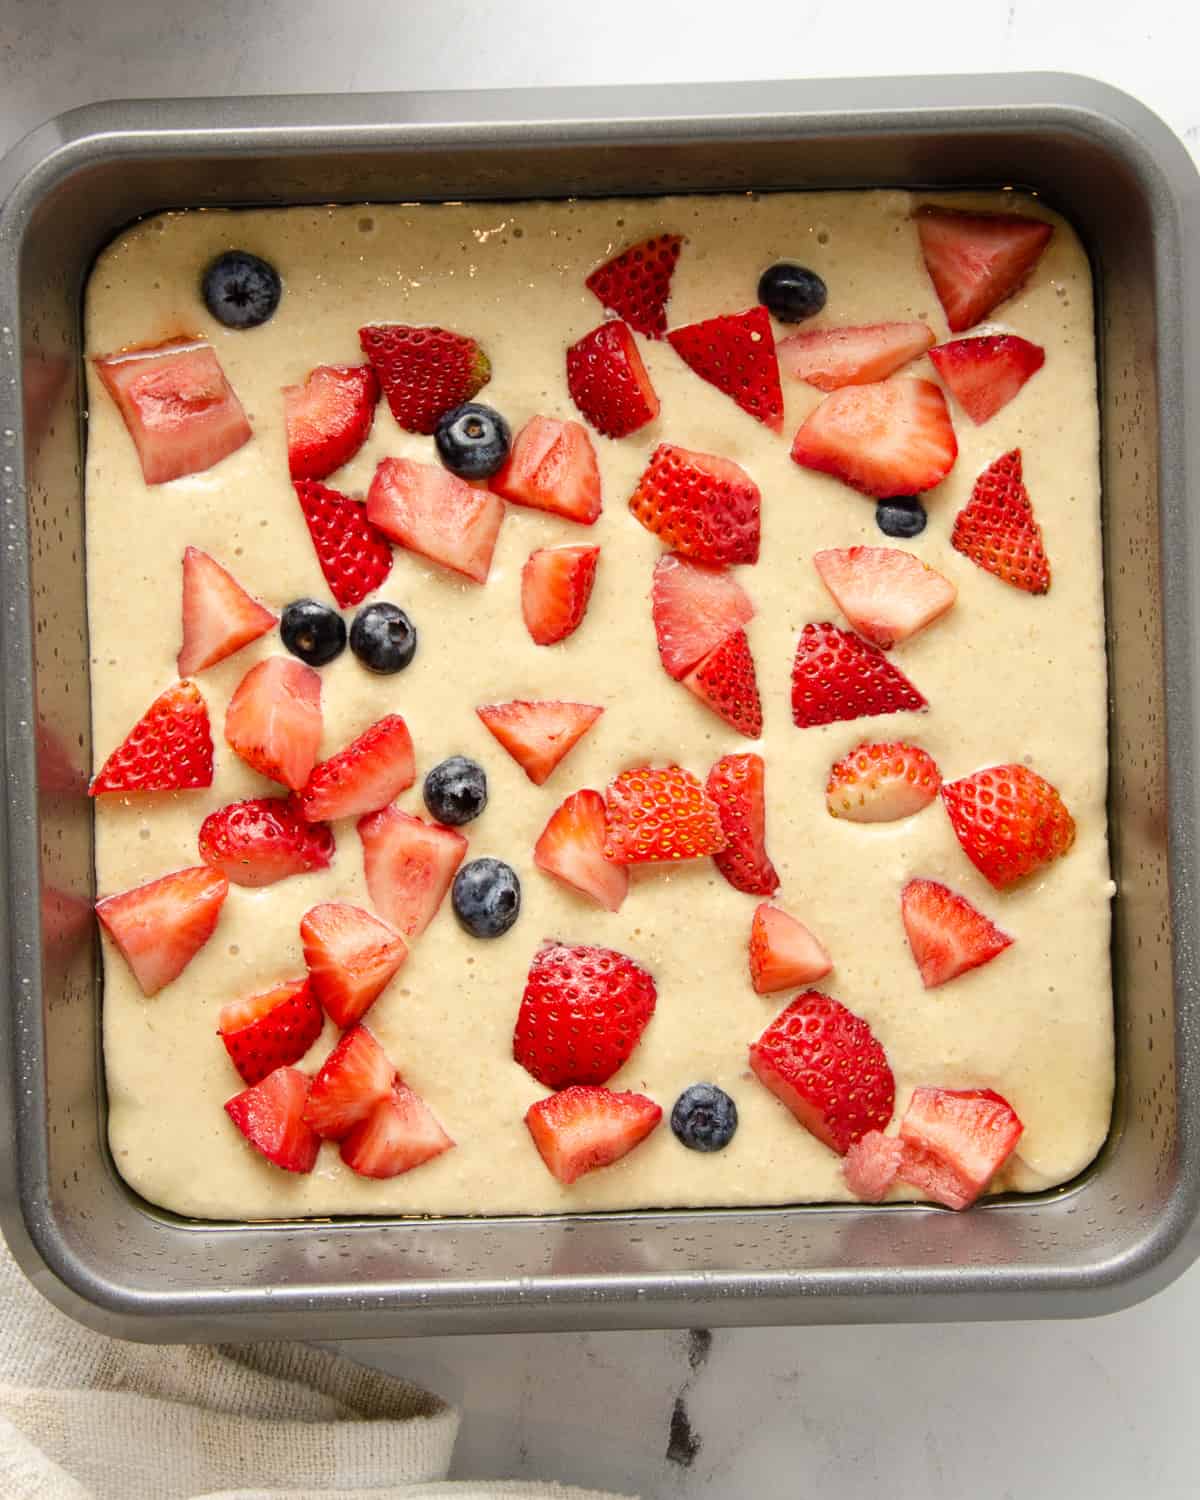 Baked oats batter in a baking dish with strawberries and blueberries on top before baking.